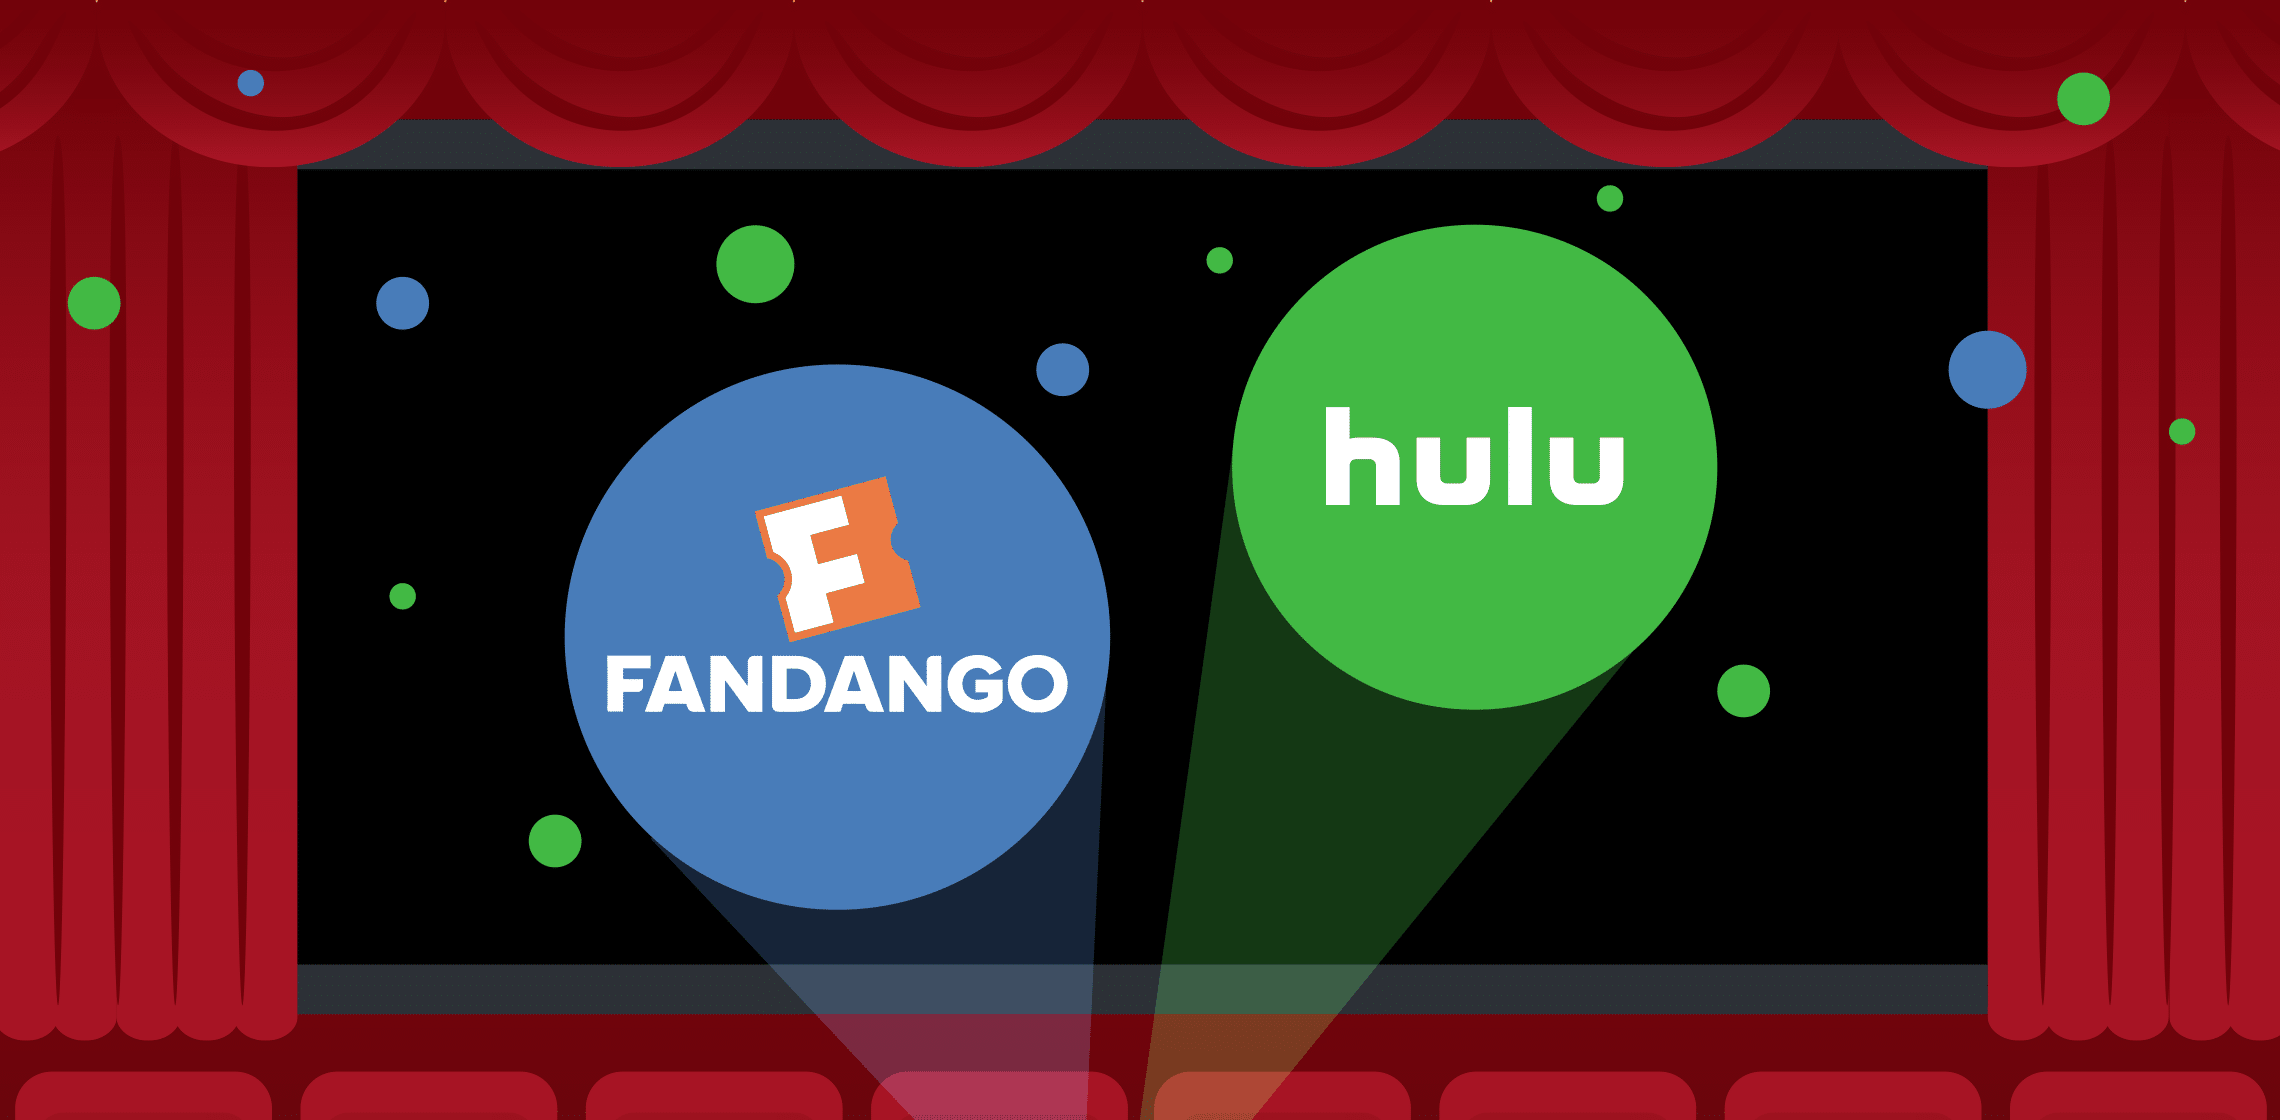 Stay entertained with kicks this summer from Fandango and Hulu